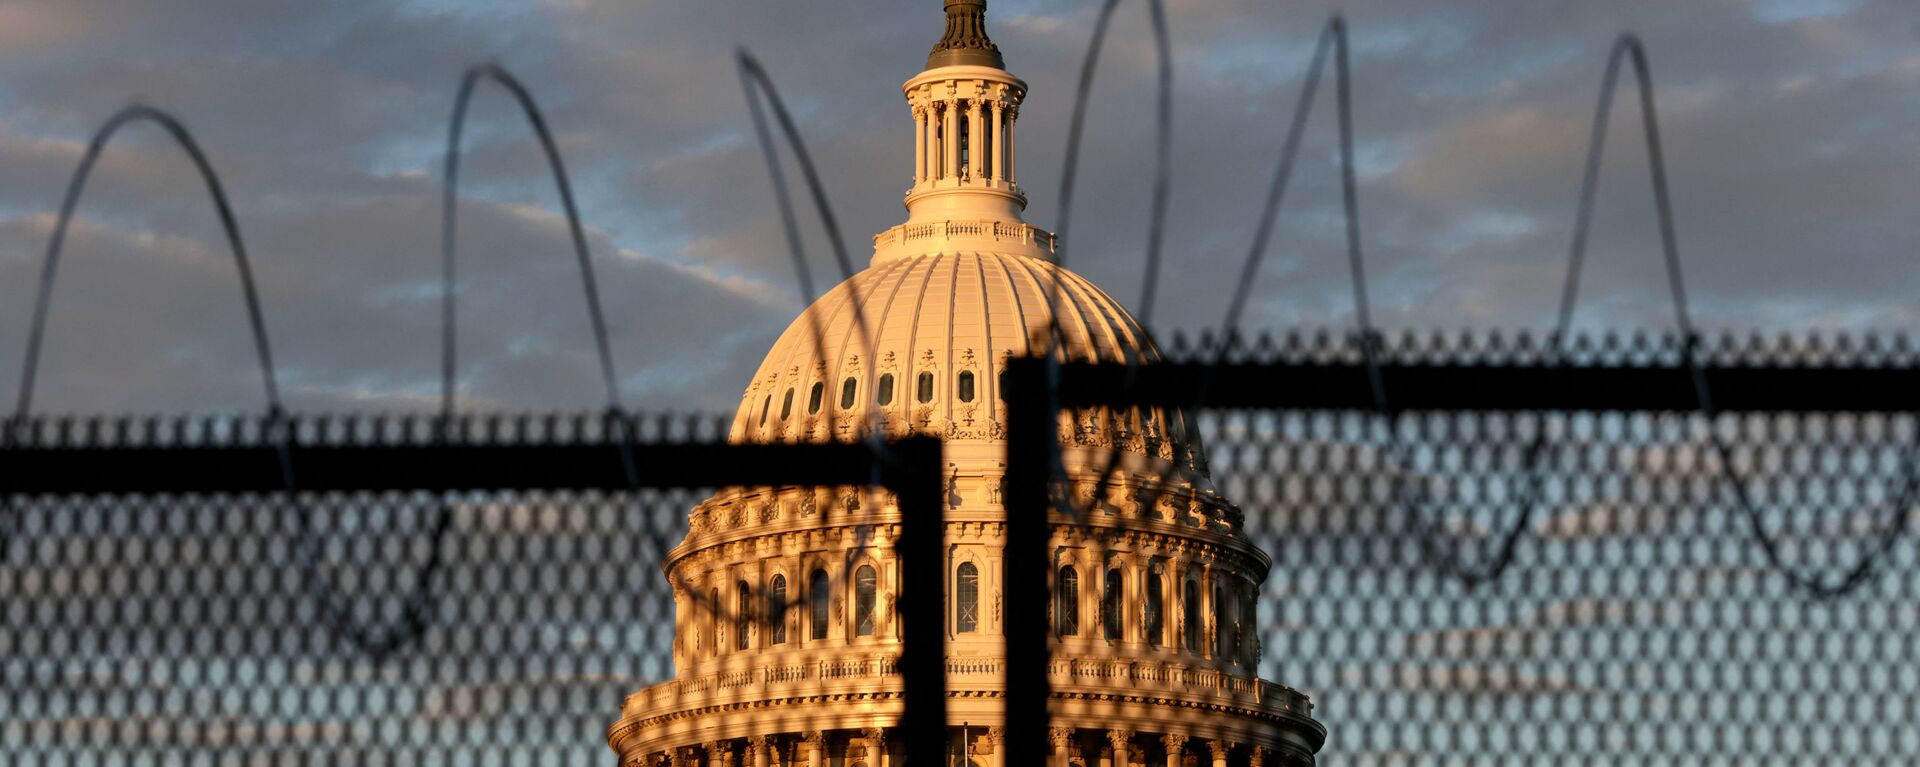  The U.S. Capitol is seen behind a fence with razor wire during sunrise on January 16, 2021 in Washington, DC. After last week's riots at the U.S. Capitol Building, the FBI has warned of additional threats in the nation's capital and in all 50 states. According to reports, as many as 25,000 National Guard soldiers will be guarding the city as preparations are made for the inauguration of Joe Biden as the 46th U.S. President. - Sputnik International, 1920, 16.12.2023